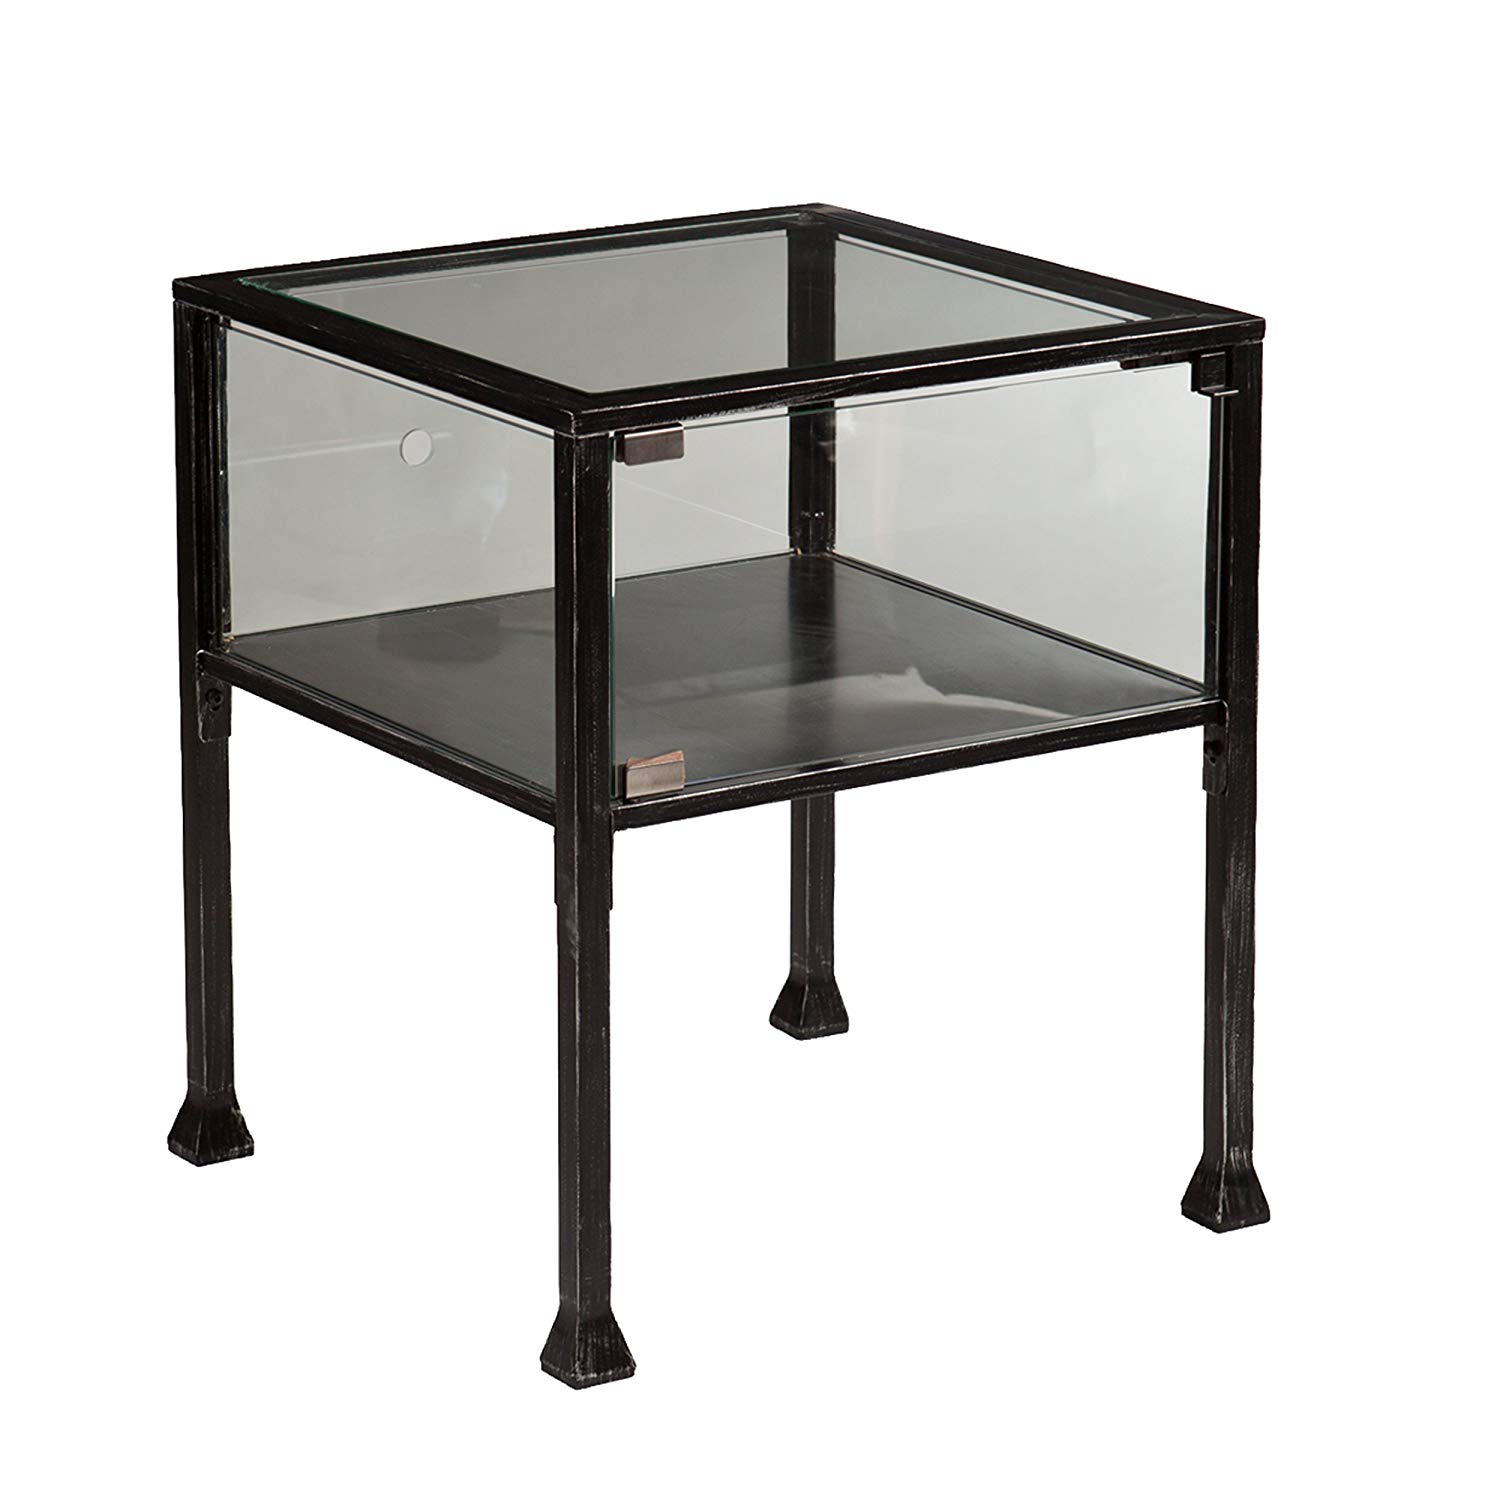 southern enterprises terrarium display side end table black glass accent with silver distressed finish kitchen dining bedside tables wall three piece set short nightstand bookends